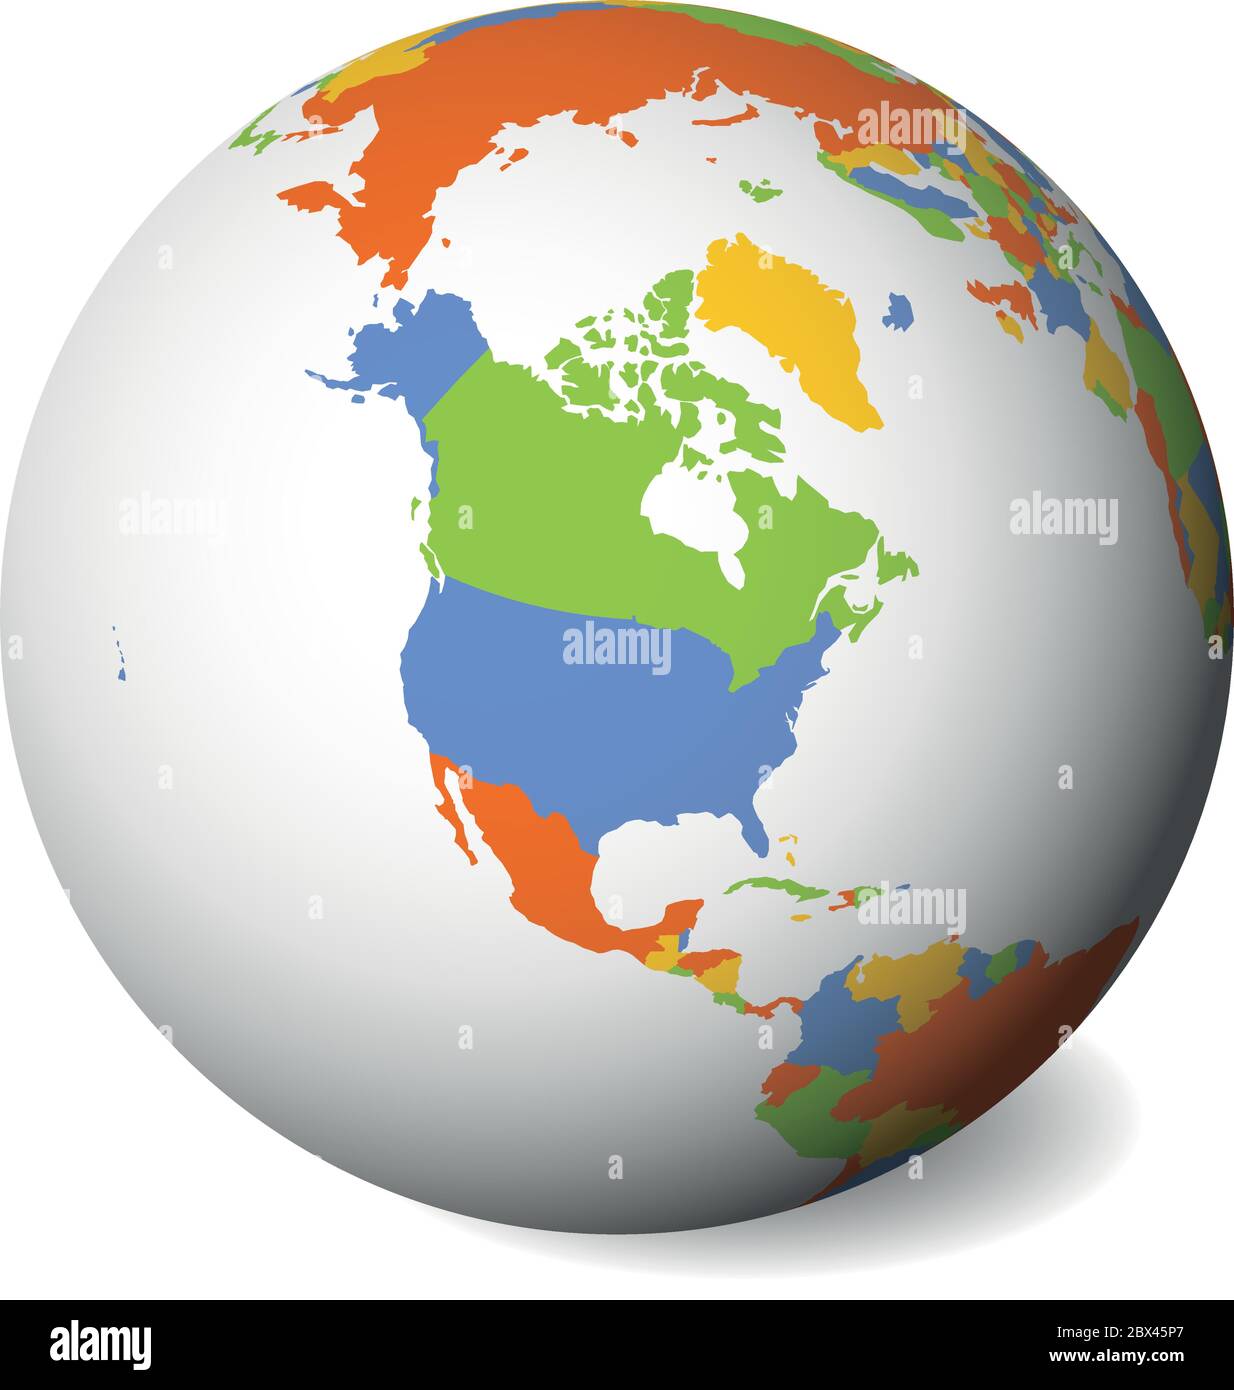 Blank political map of North America. Earth globe with colored map. Vector illustration. Stock Vector